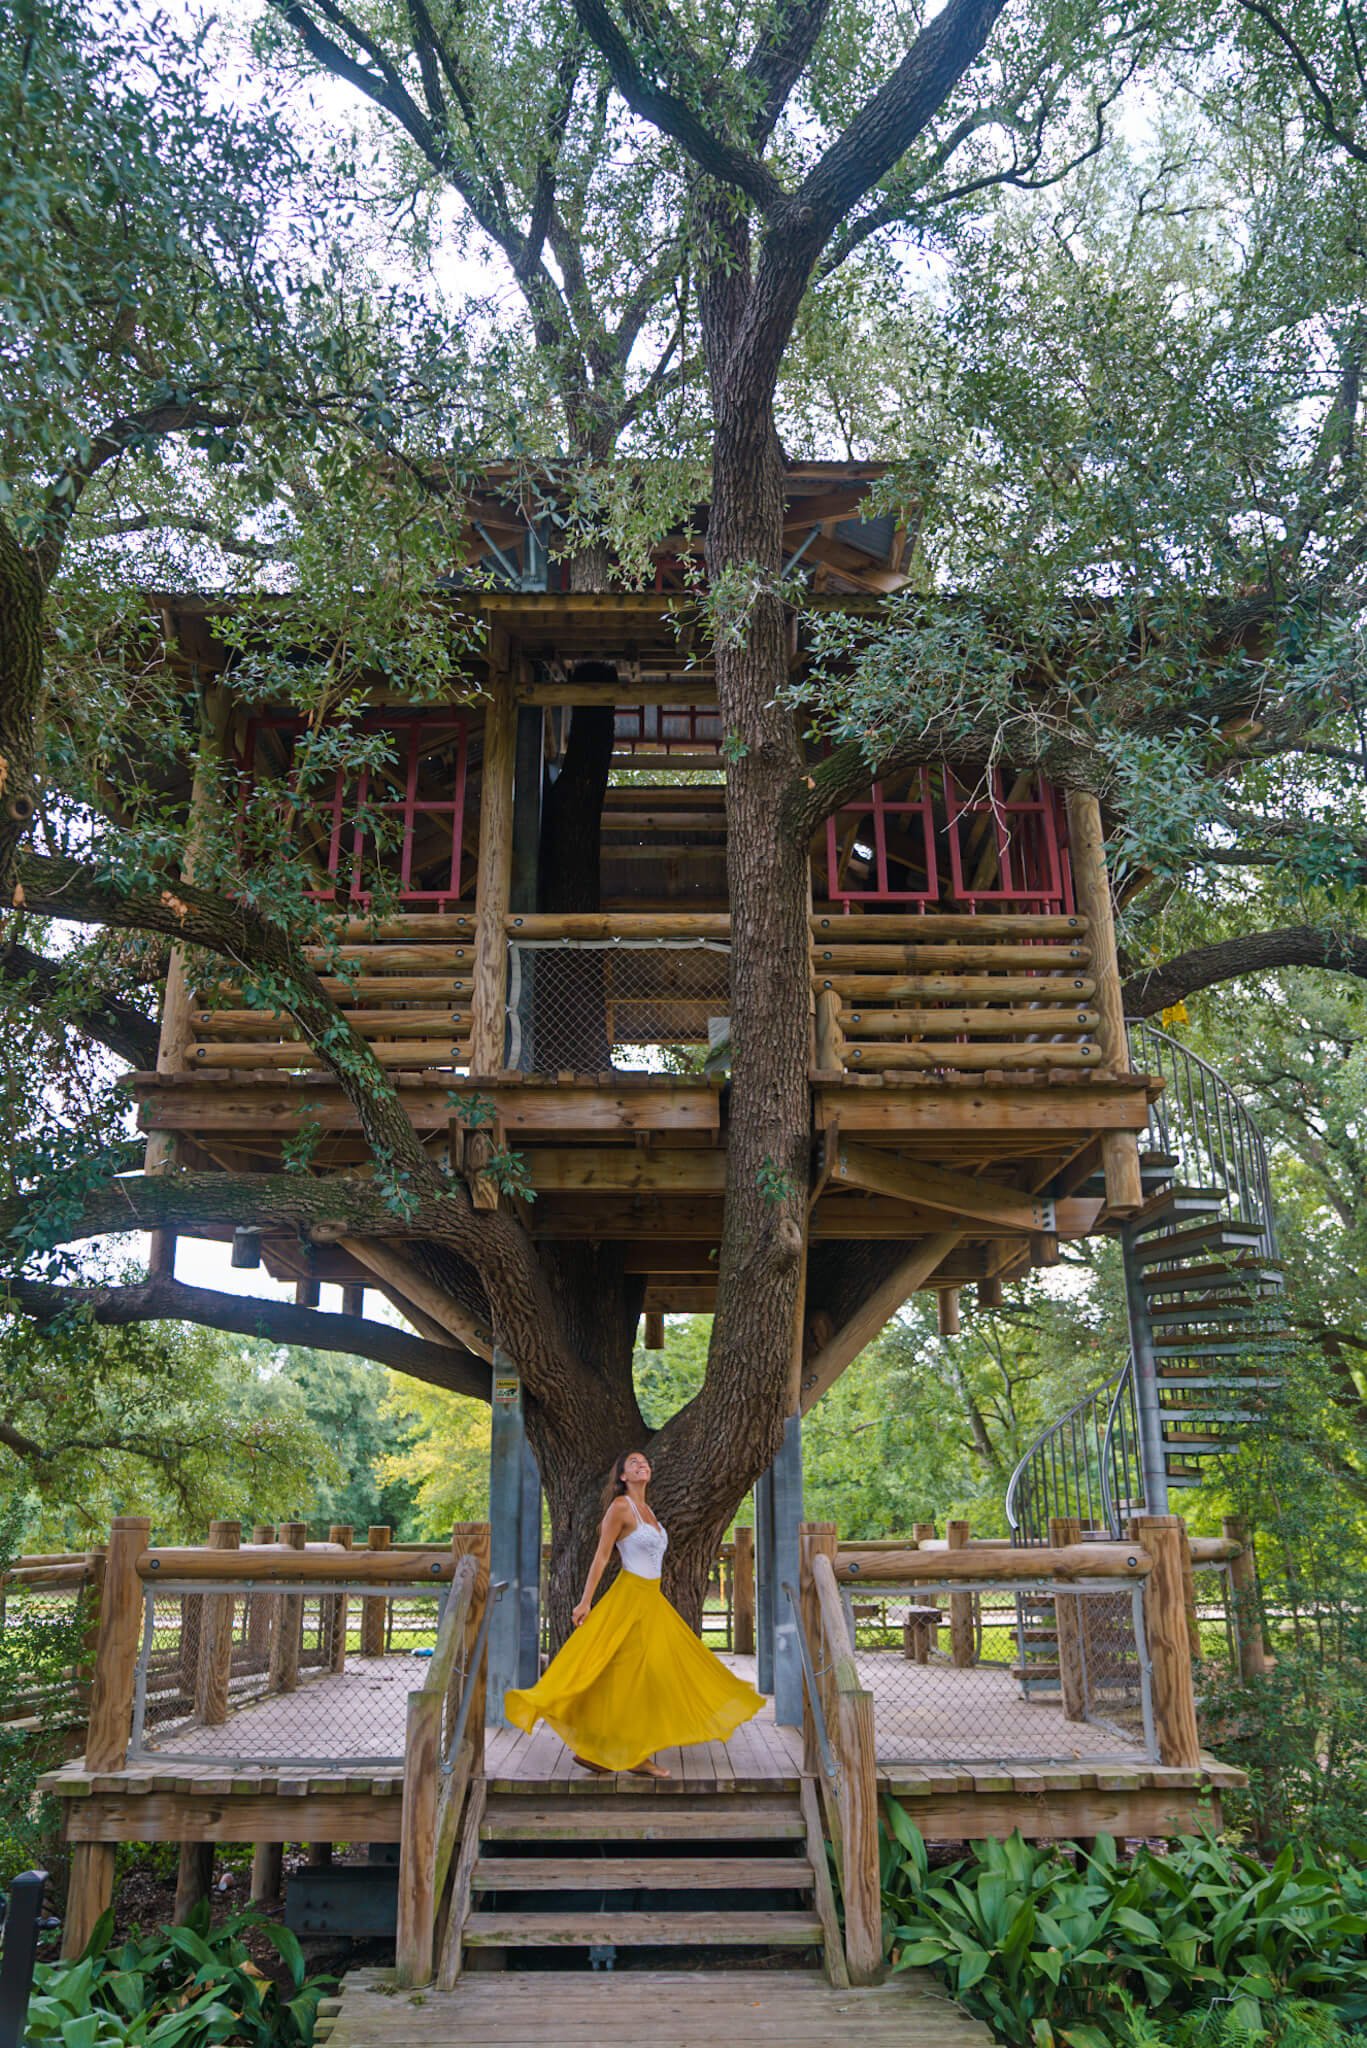 Tree house in Texas, places to visit in Texas